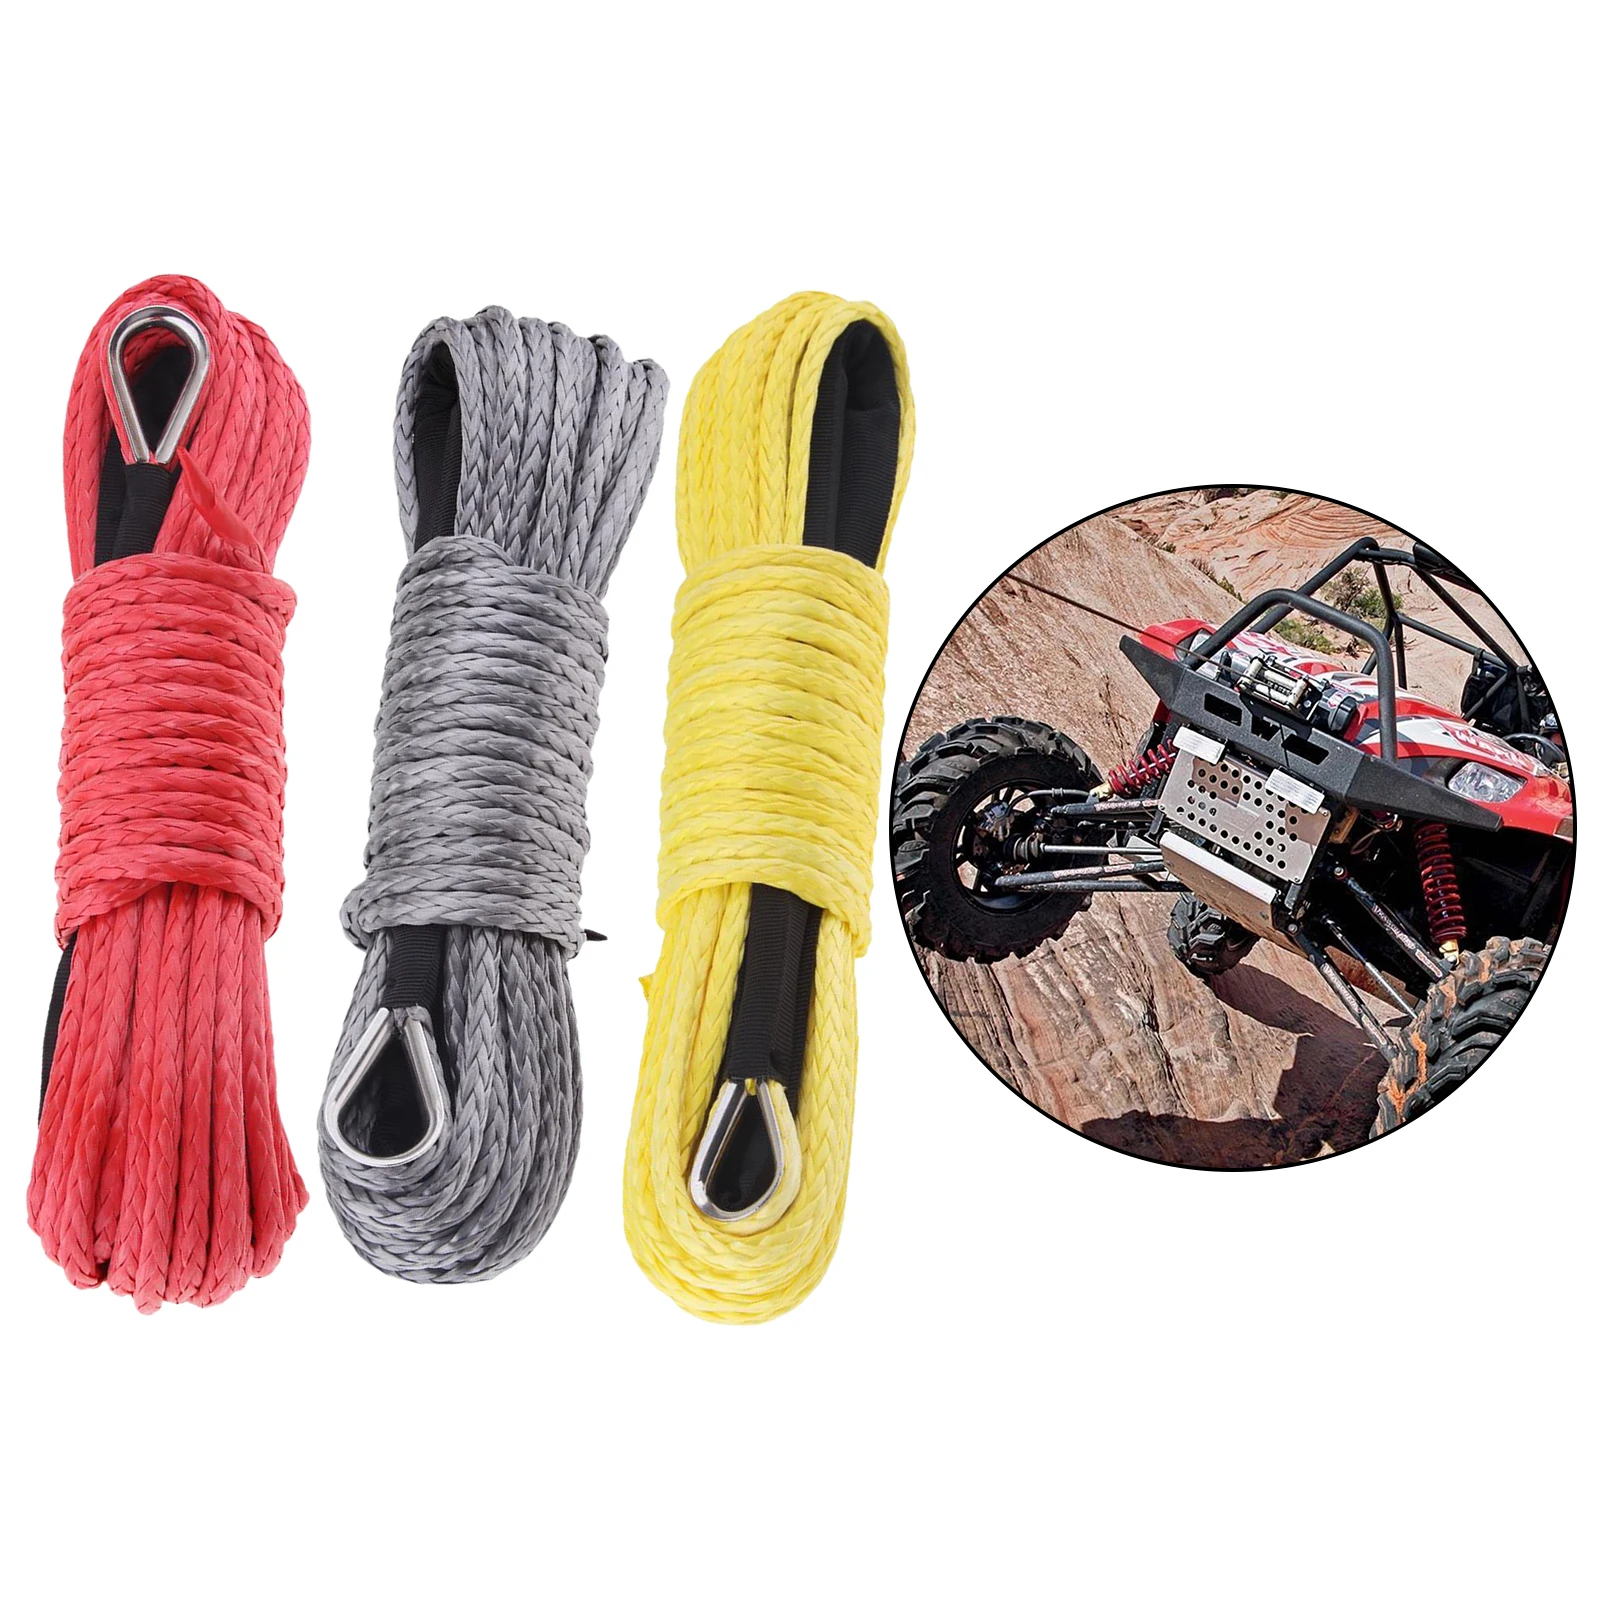 6mm x 15m Synthetic Fiber Winch Line Cable Rope for ATV UTV Boat Repairable